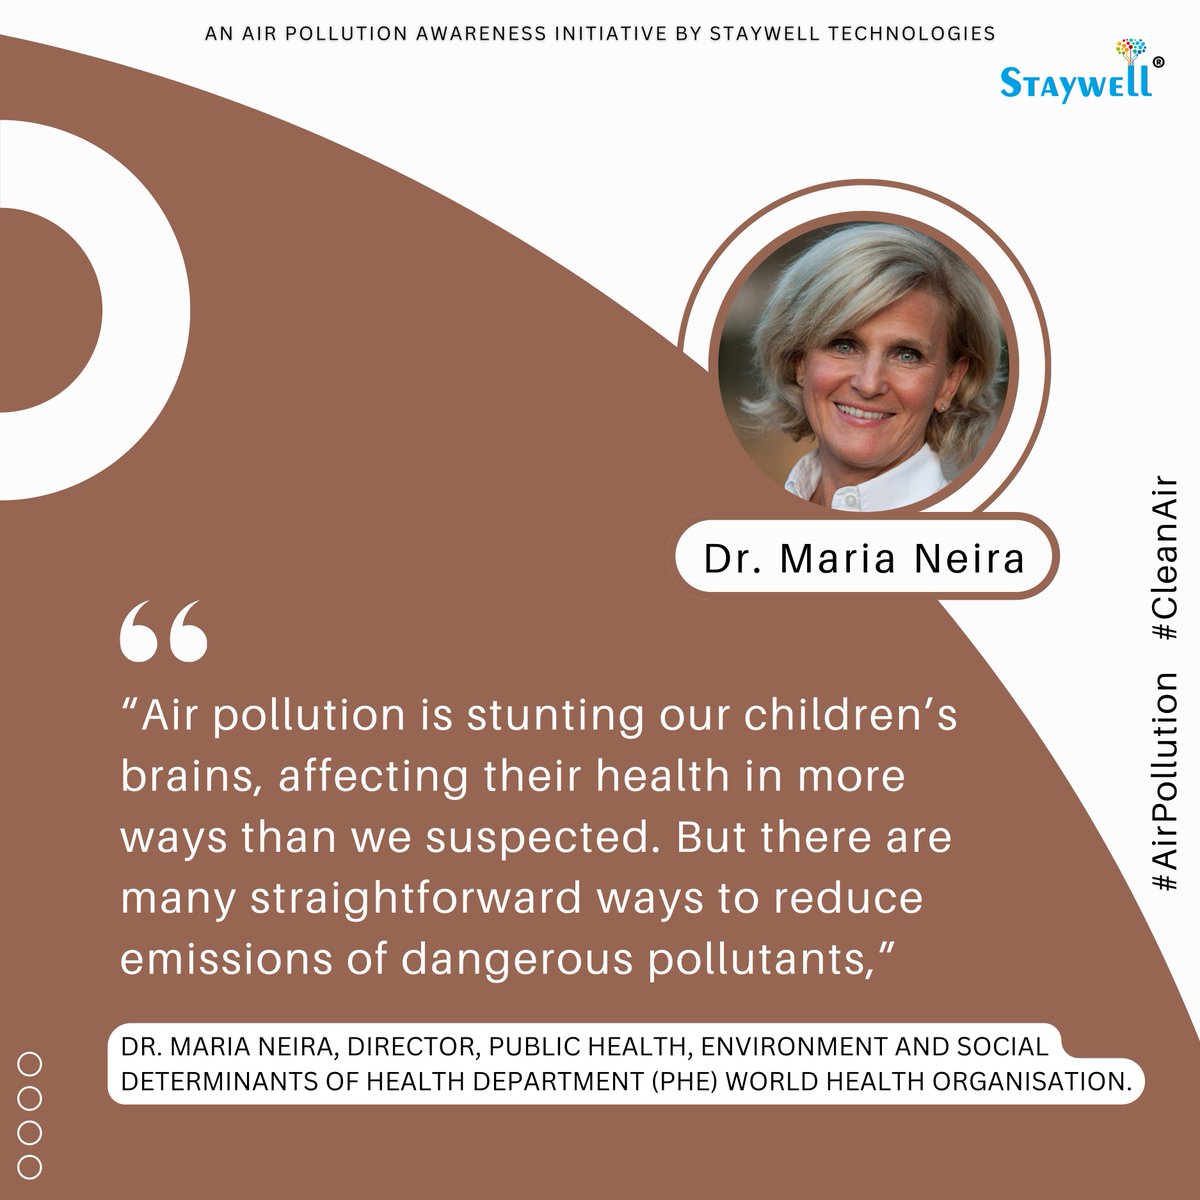 Air Pollution Harming Children's Brains! #CleanAirForKids Dr. Maria Neira, a leading public health expert at the WHO, sounds the alarm on air pollution's devastating impact on children's brain development and overall health. While solutions exist to curb harmful emissions,